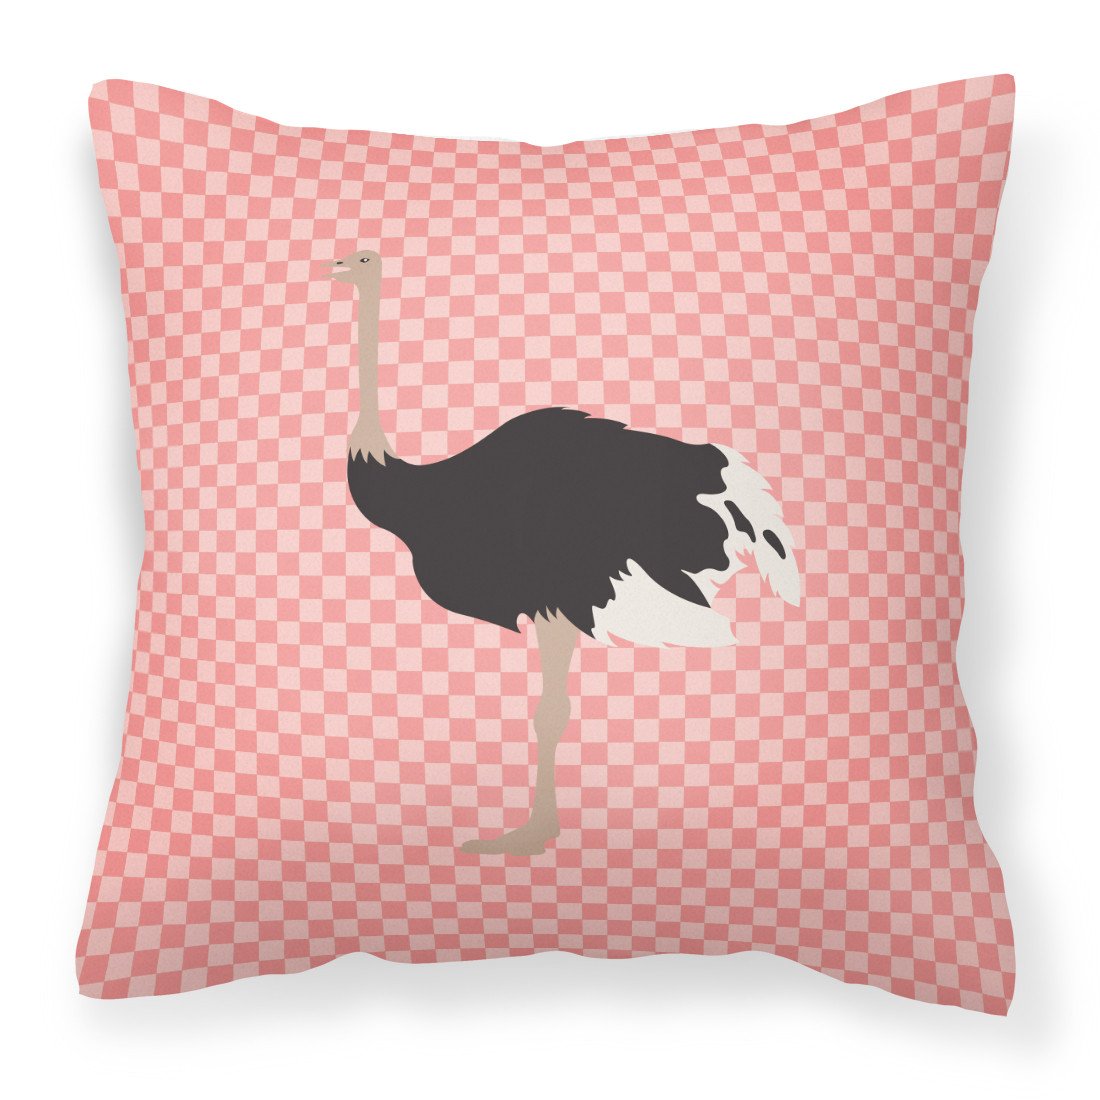 Common Ostrich Pink Check Fabric Decorative Pillow BB7924PW1818 by Caroline's Treasures